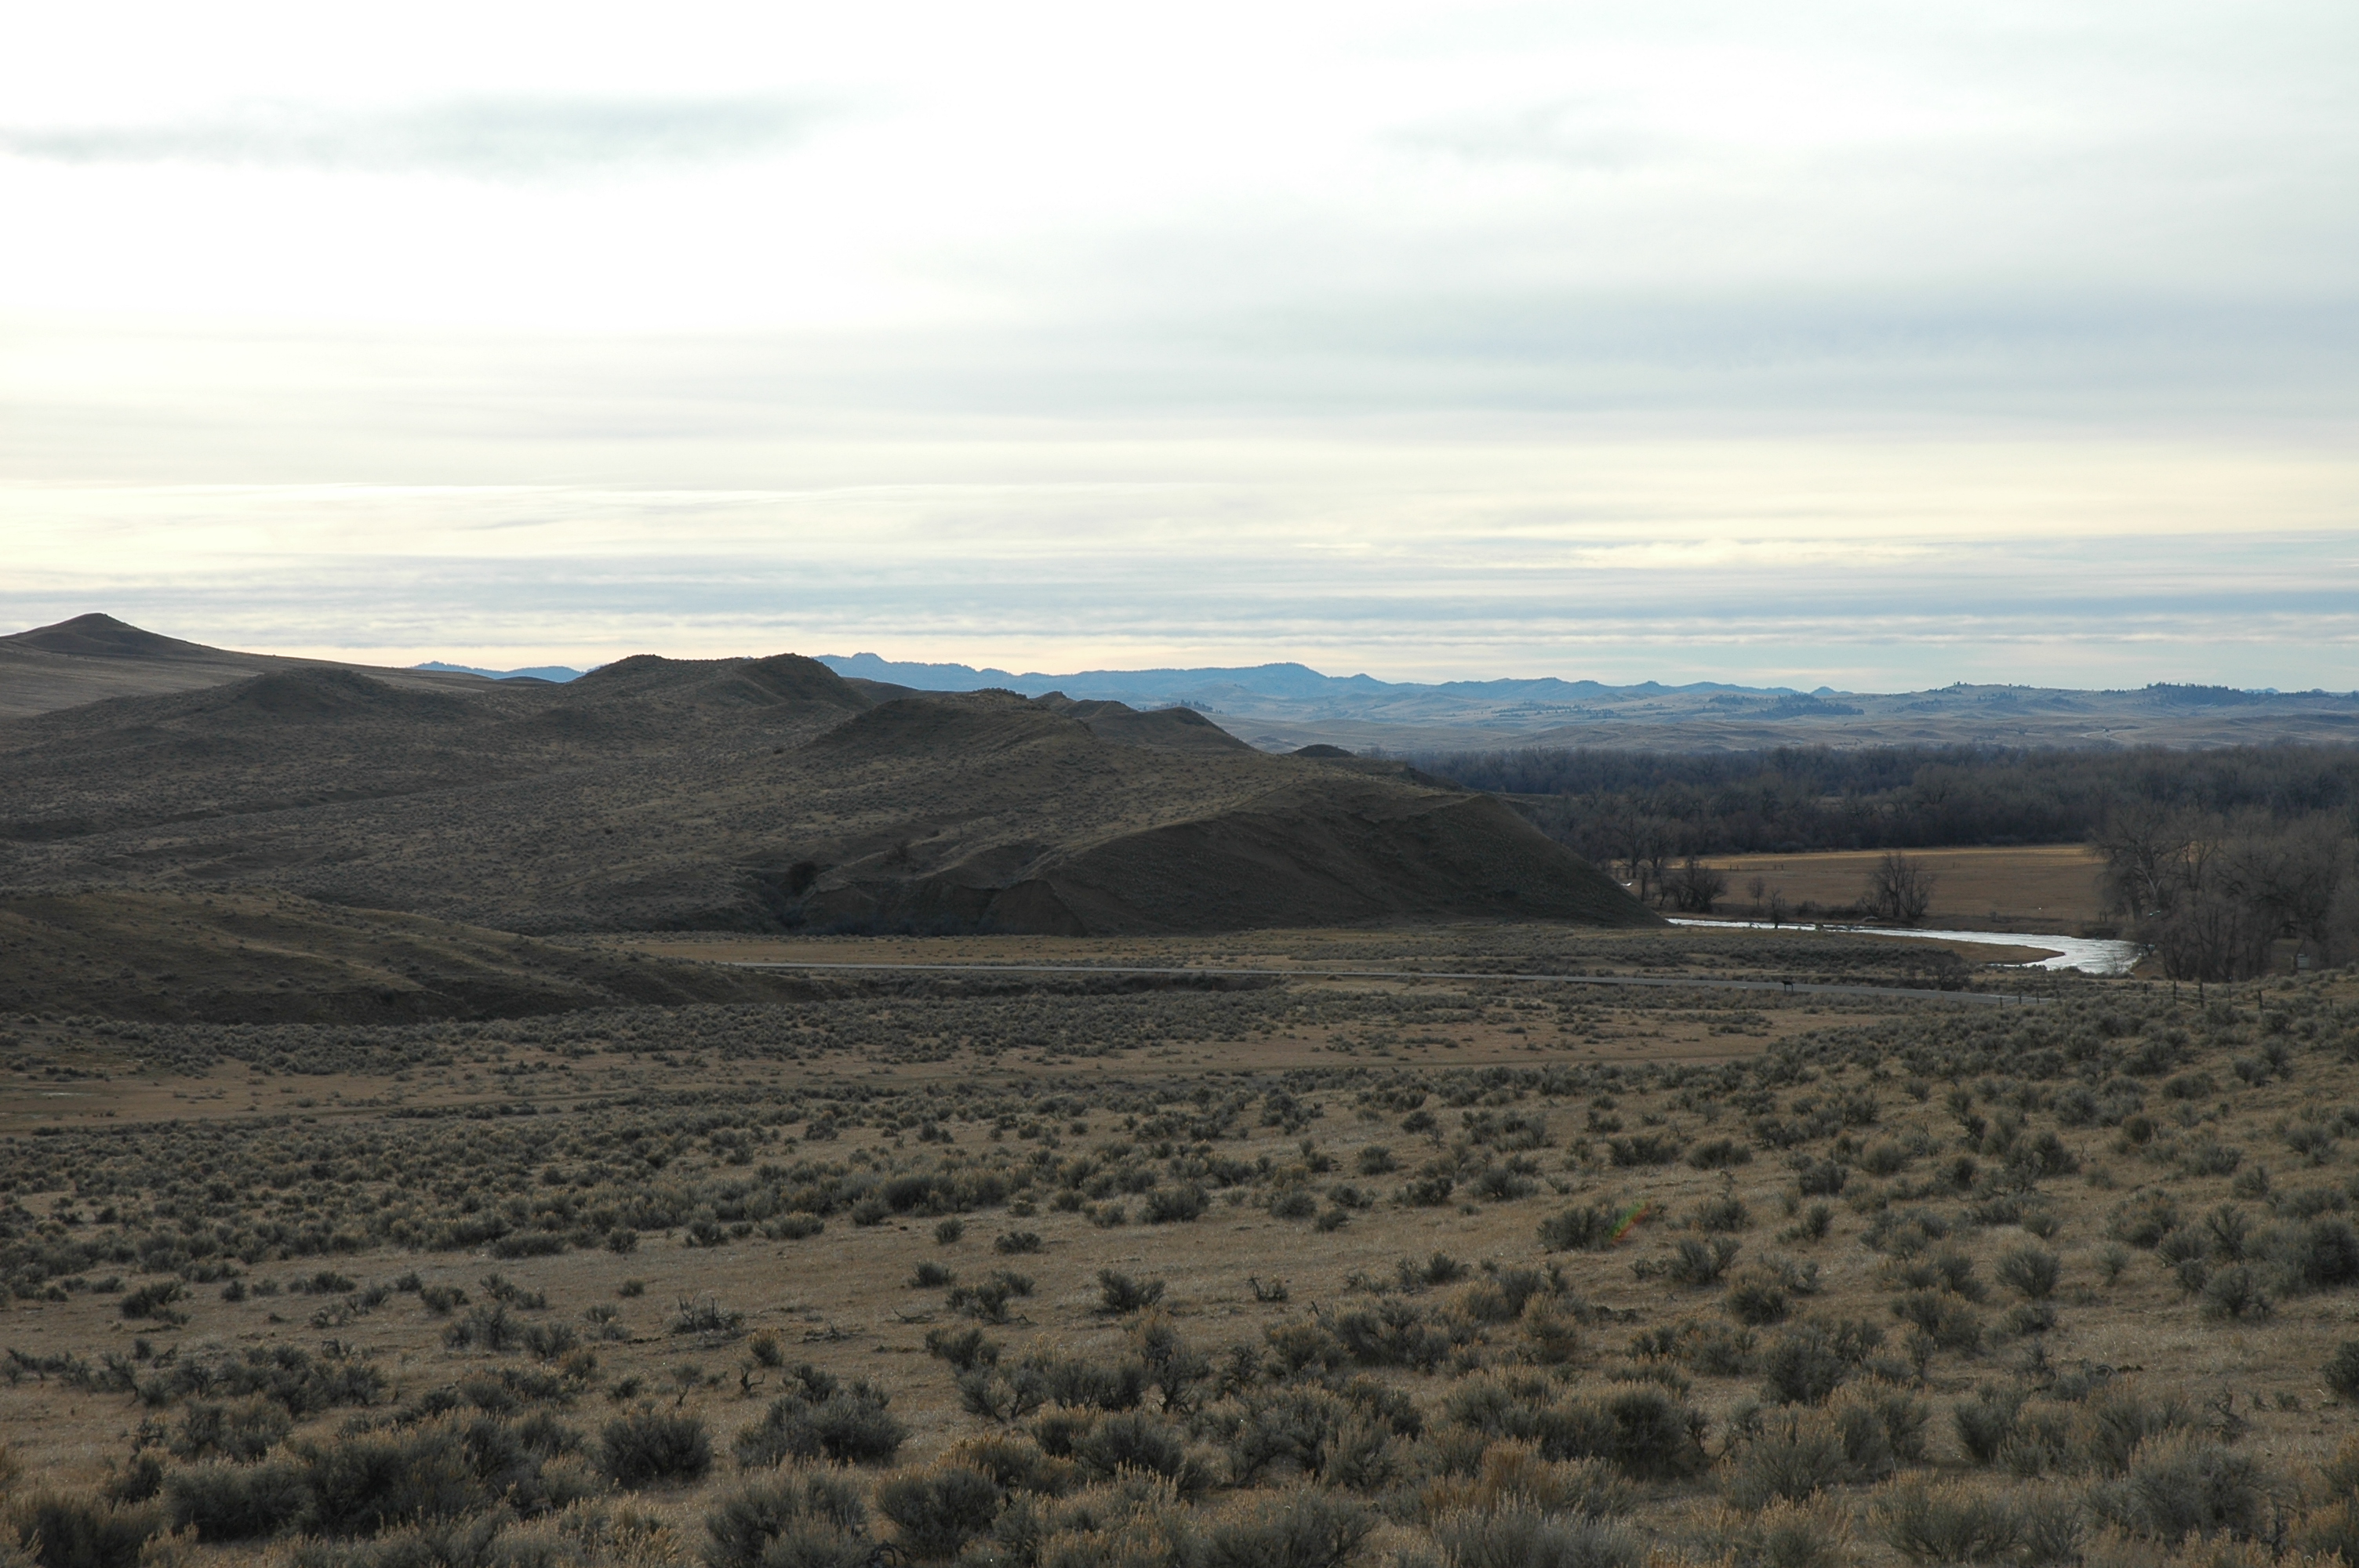 A large open prairie near several low gray hills and a small creek in the left-hand side of the image foreground. A distant chain of mountains are visible in the background. A small forest can be seen in between.